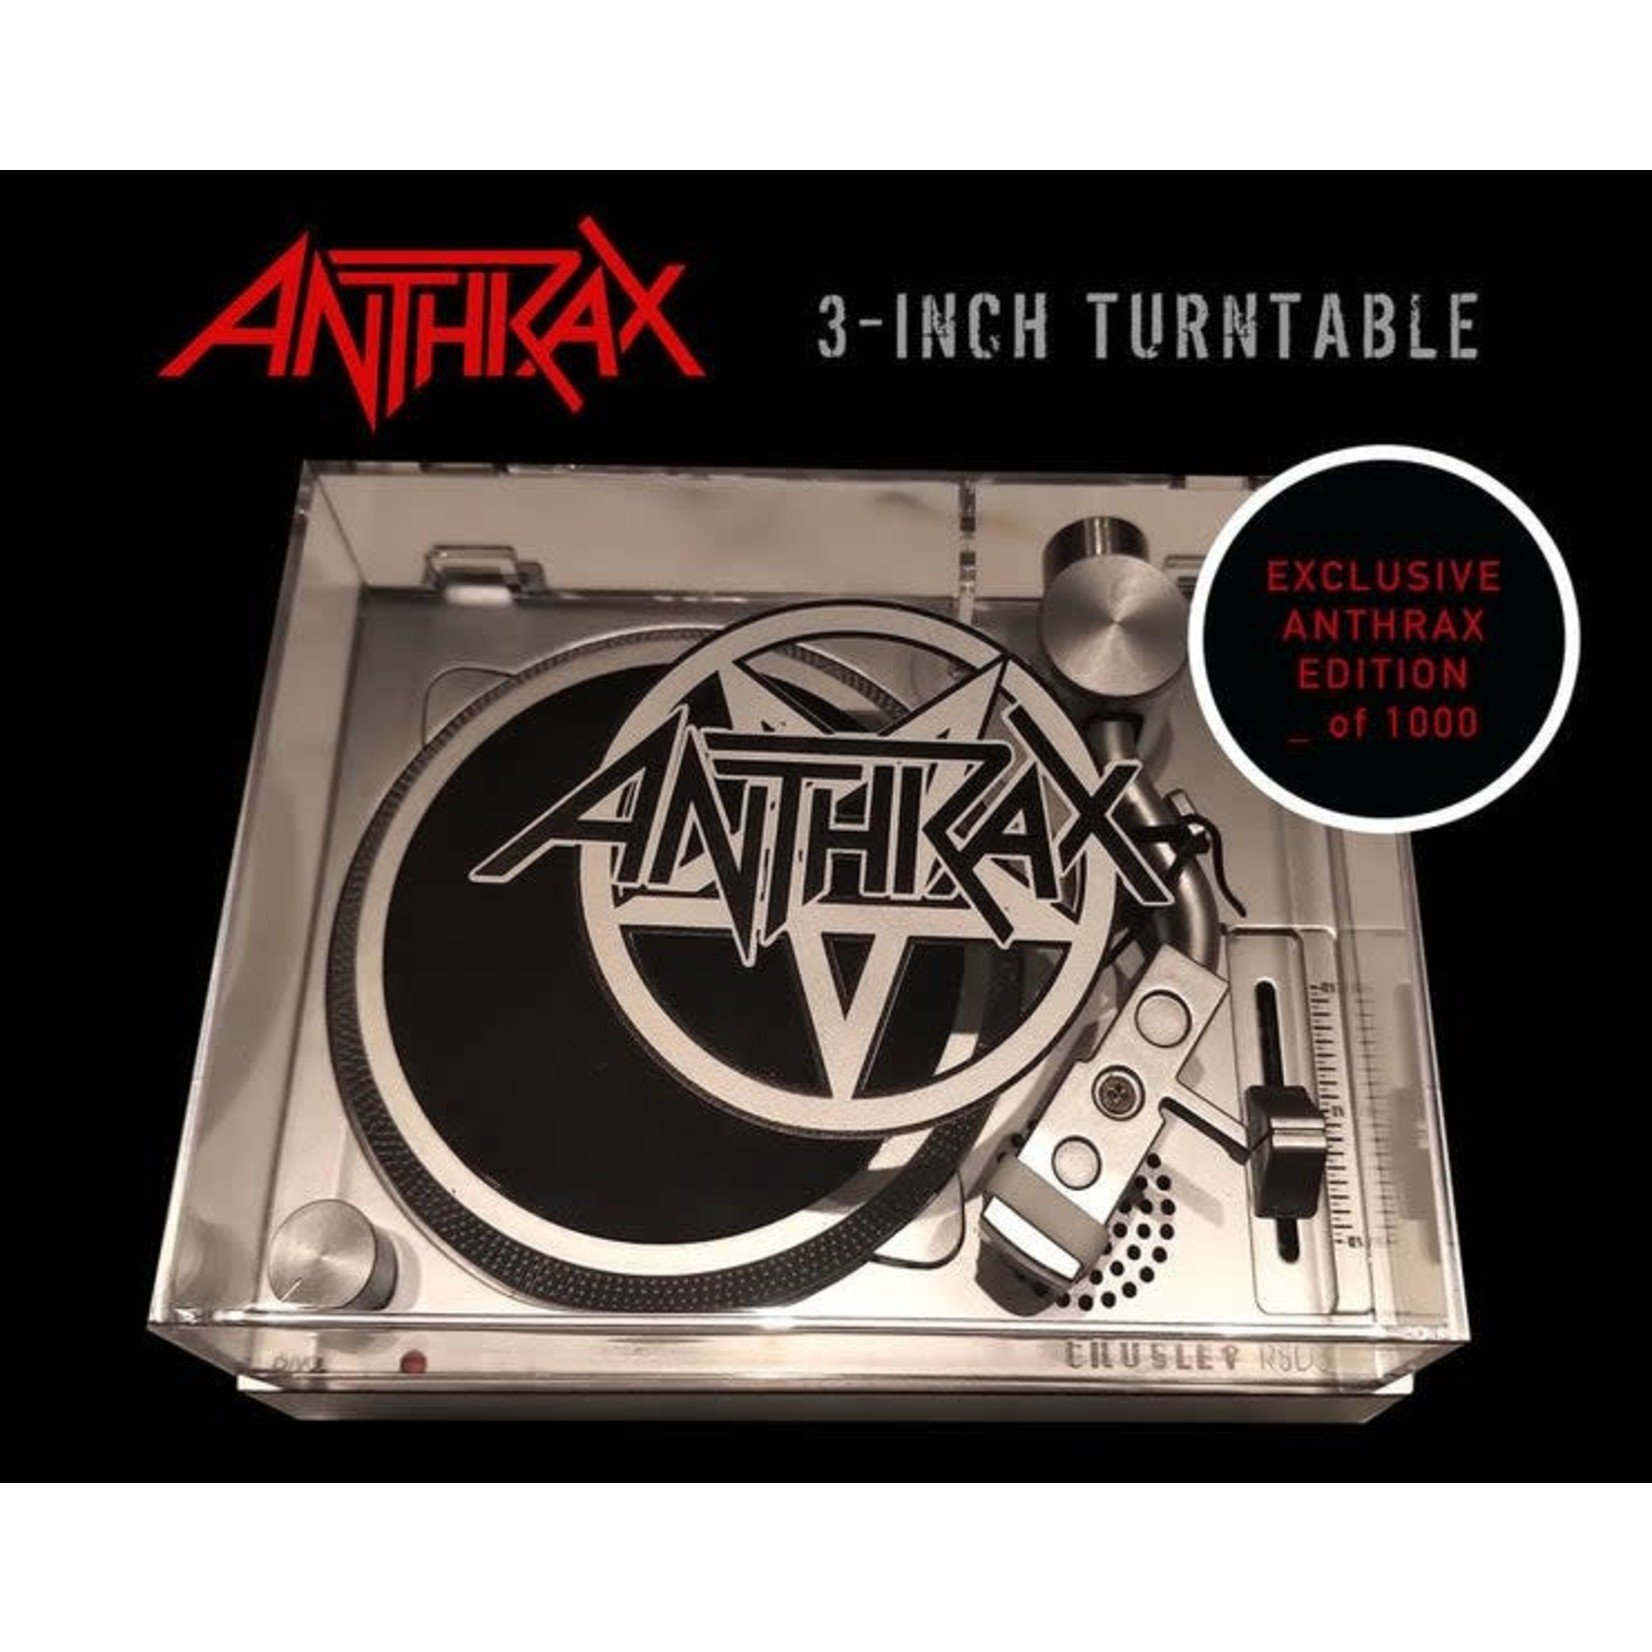 RSD3 Mini Turntable For 3" Vinyl Exclusive Anthrax Edition